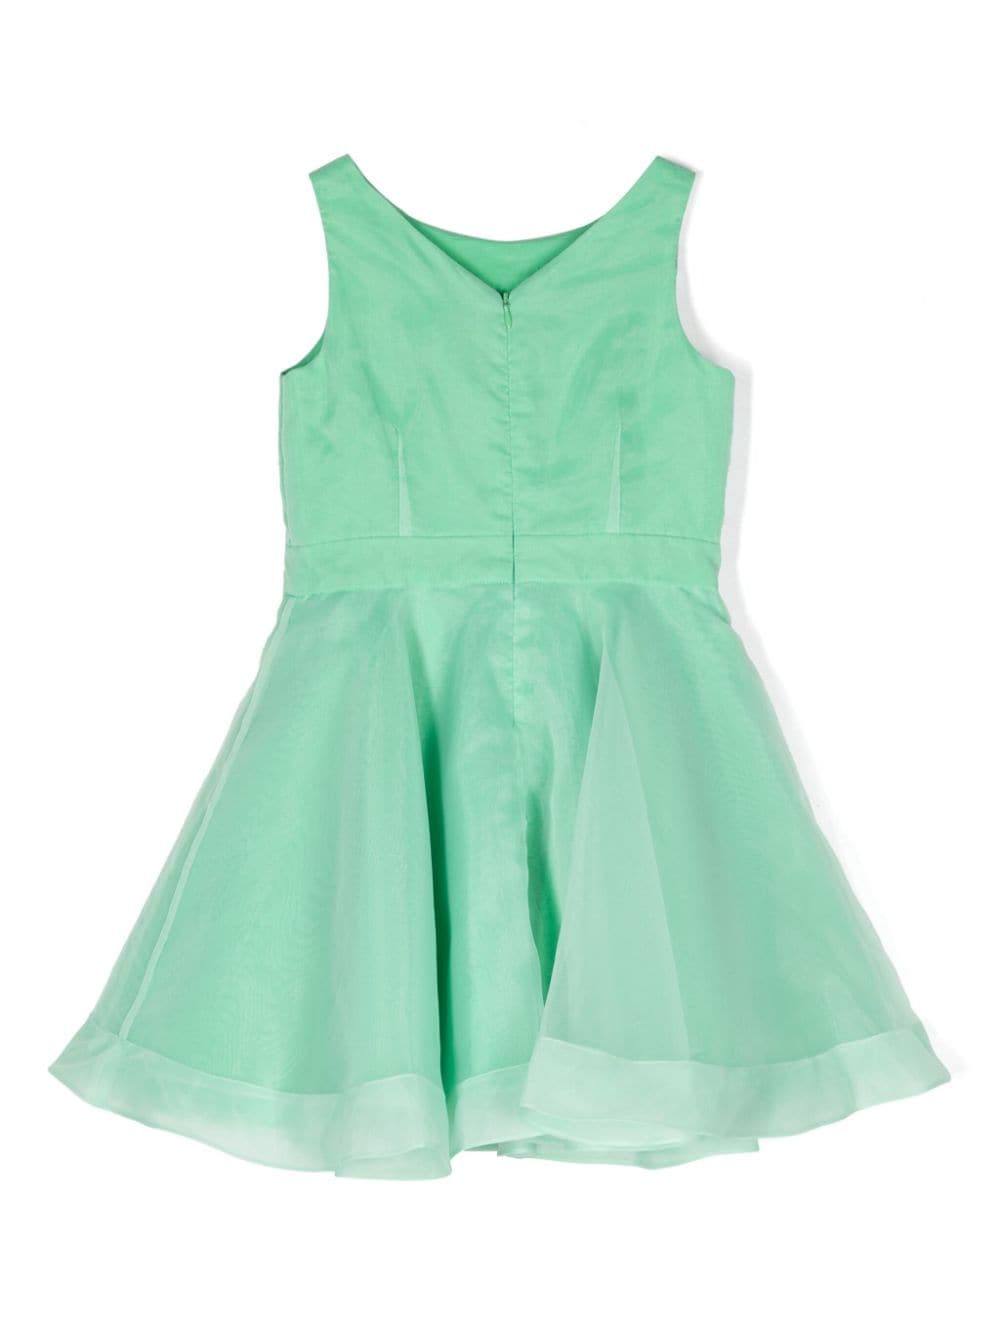 Green dress for little girls with flowers